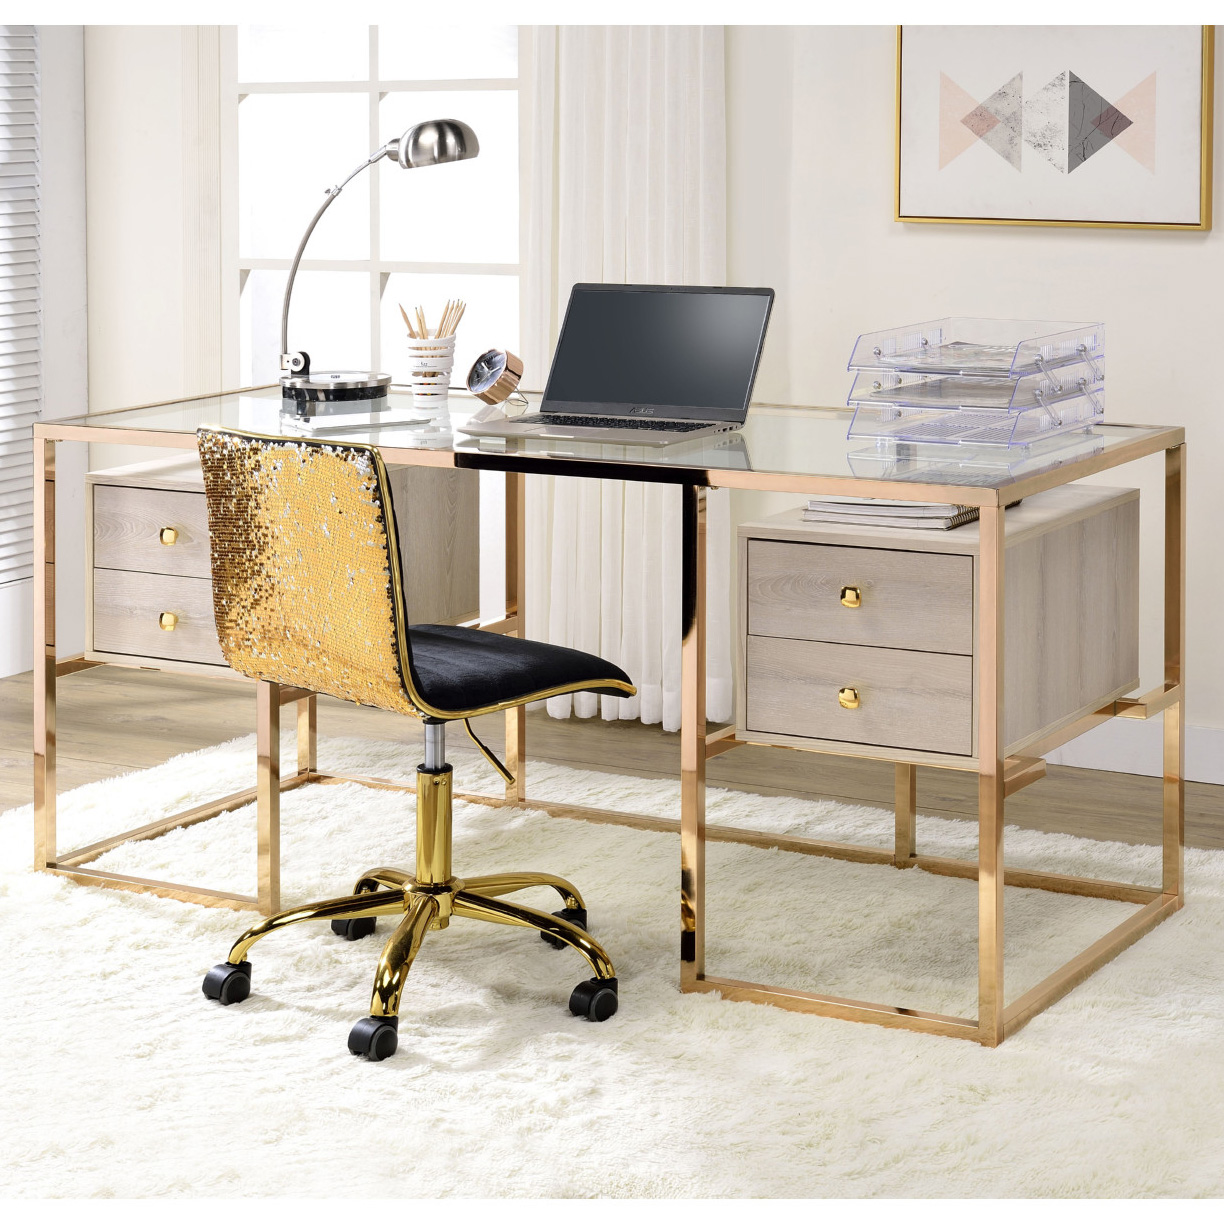 Acme 92945 Huyana Desk in Tempered Glass,Wood & Gold Metal